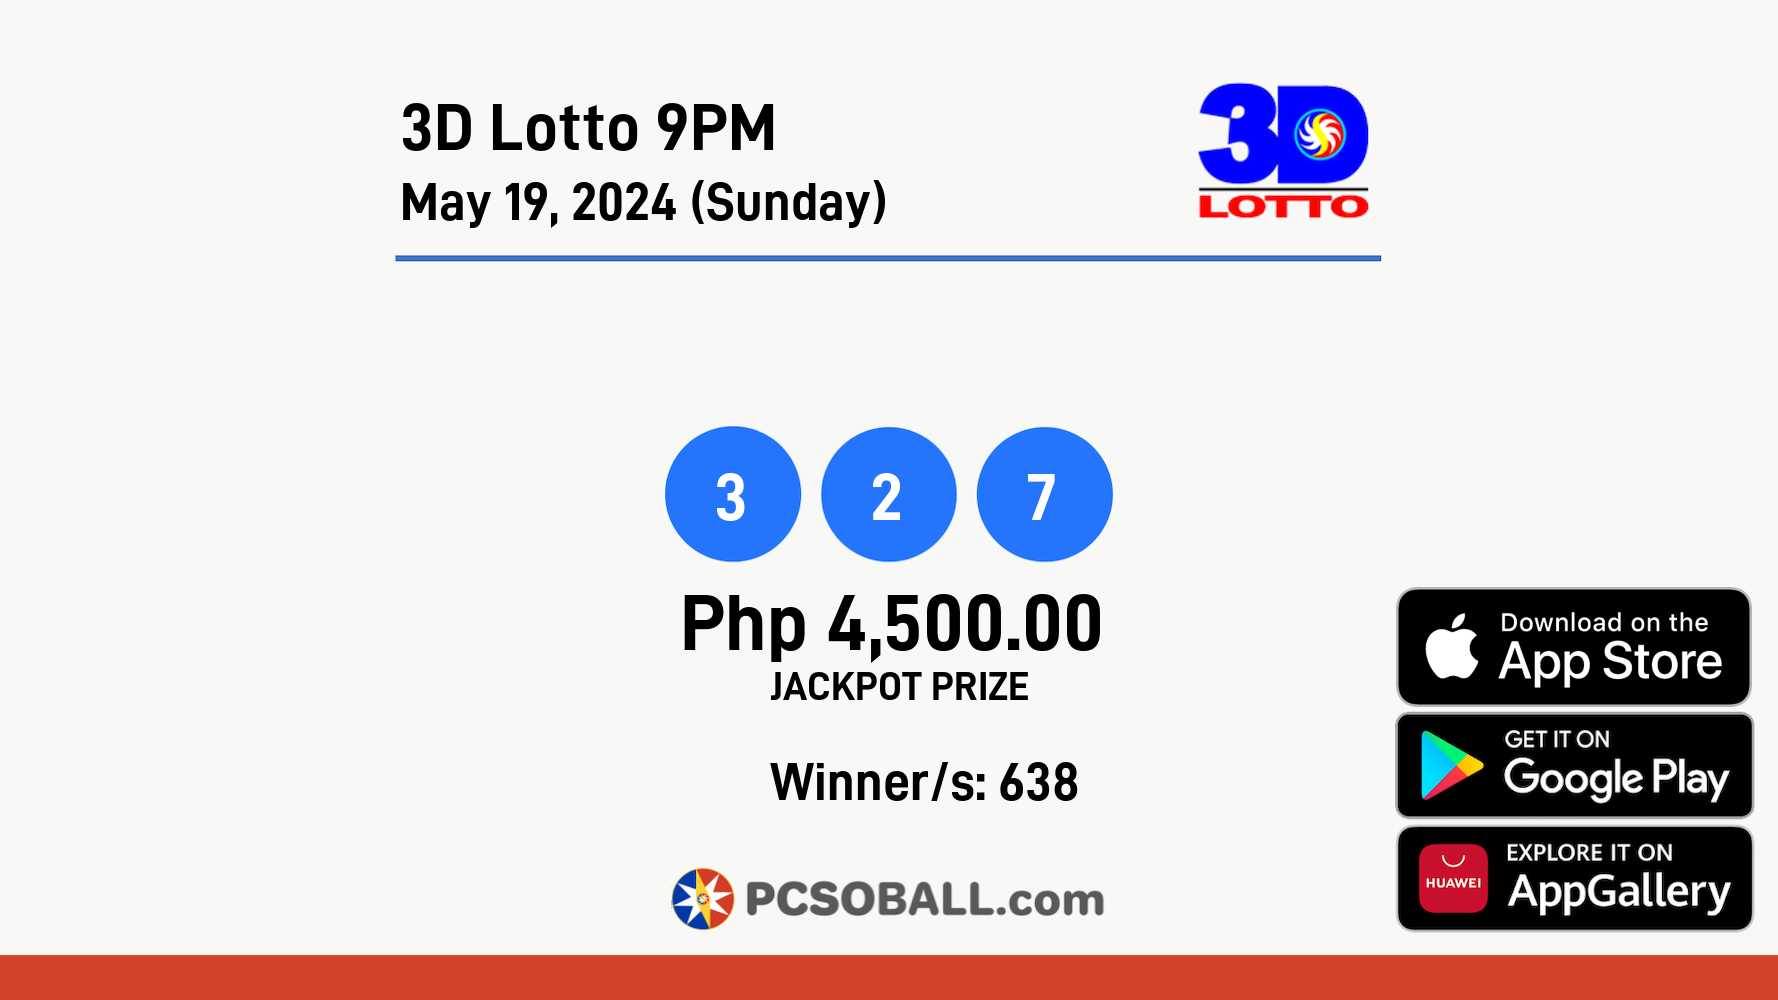 3D Lotto 9PM May 19, 2024 (Sunday) Result